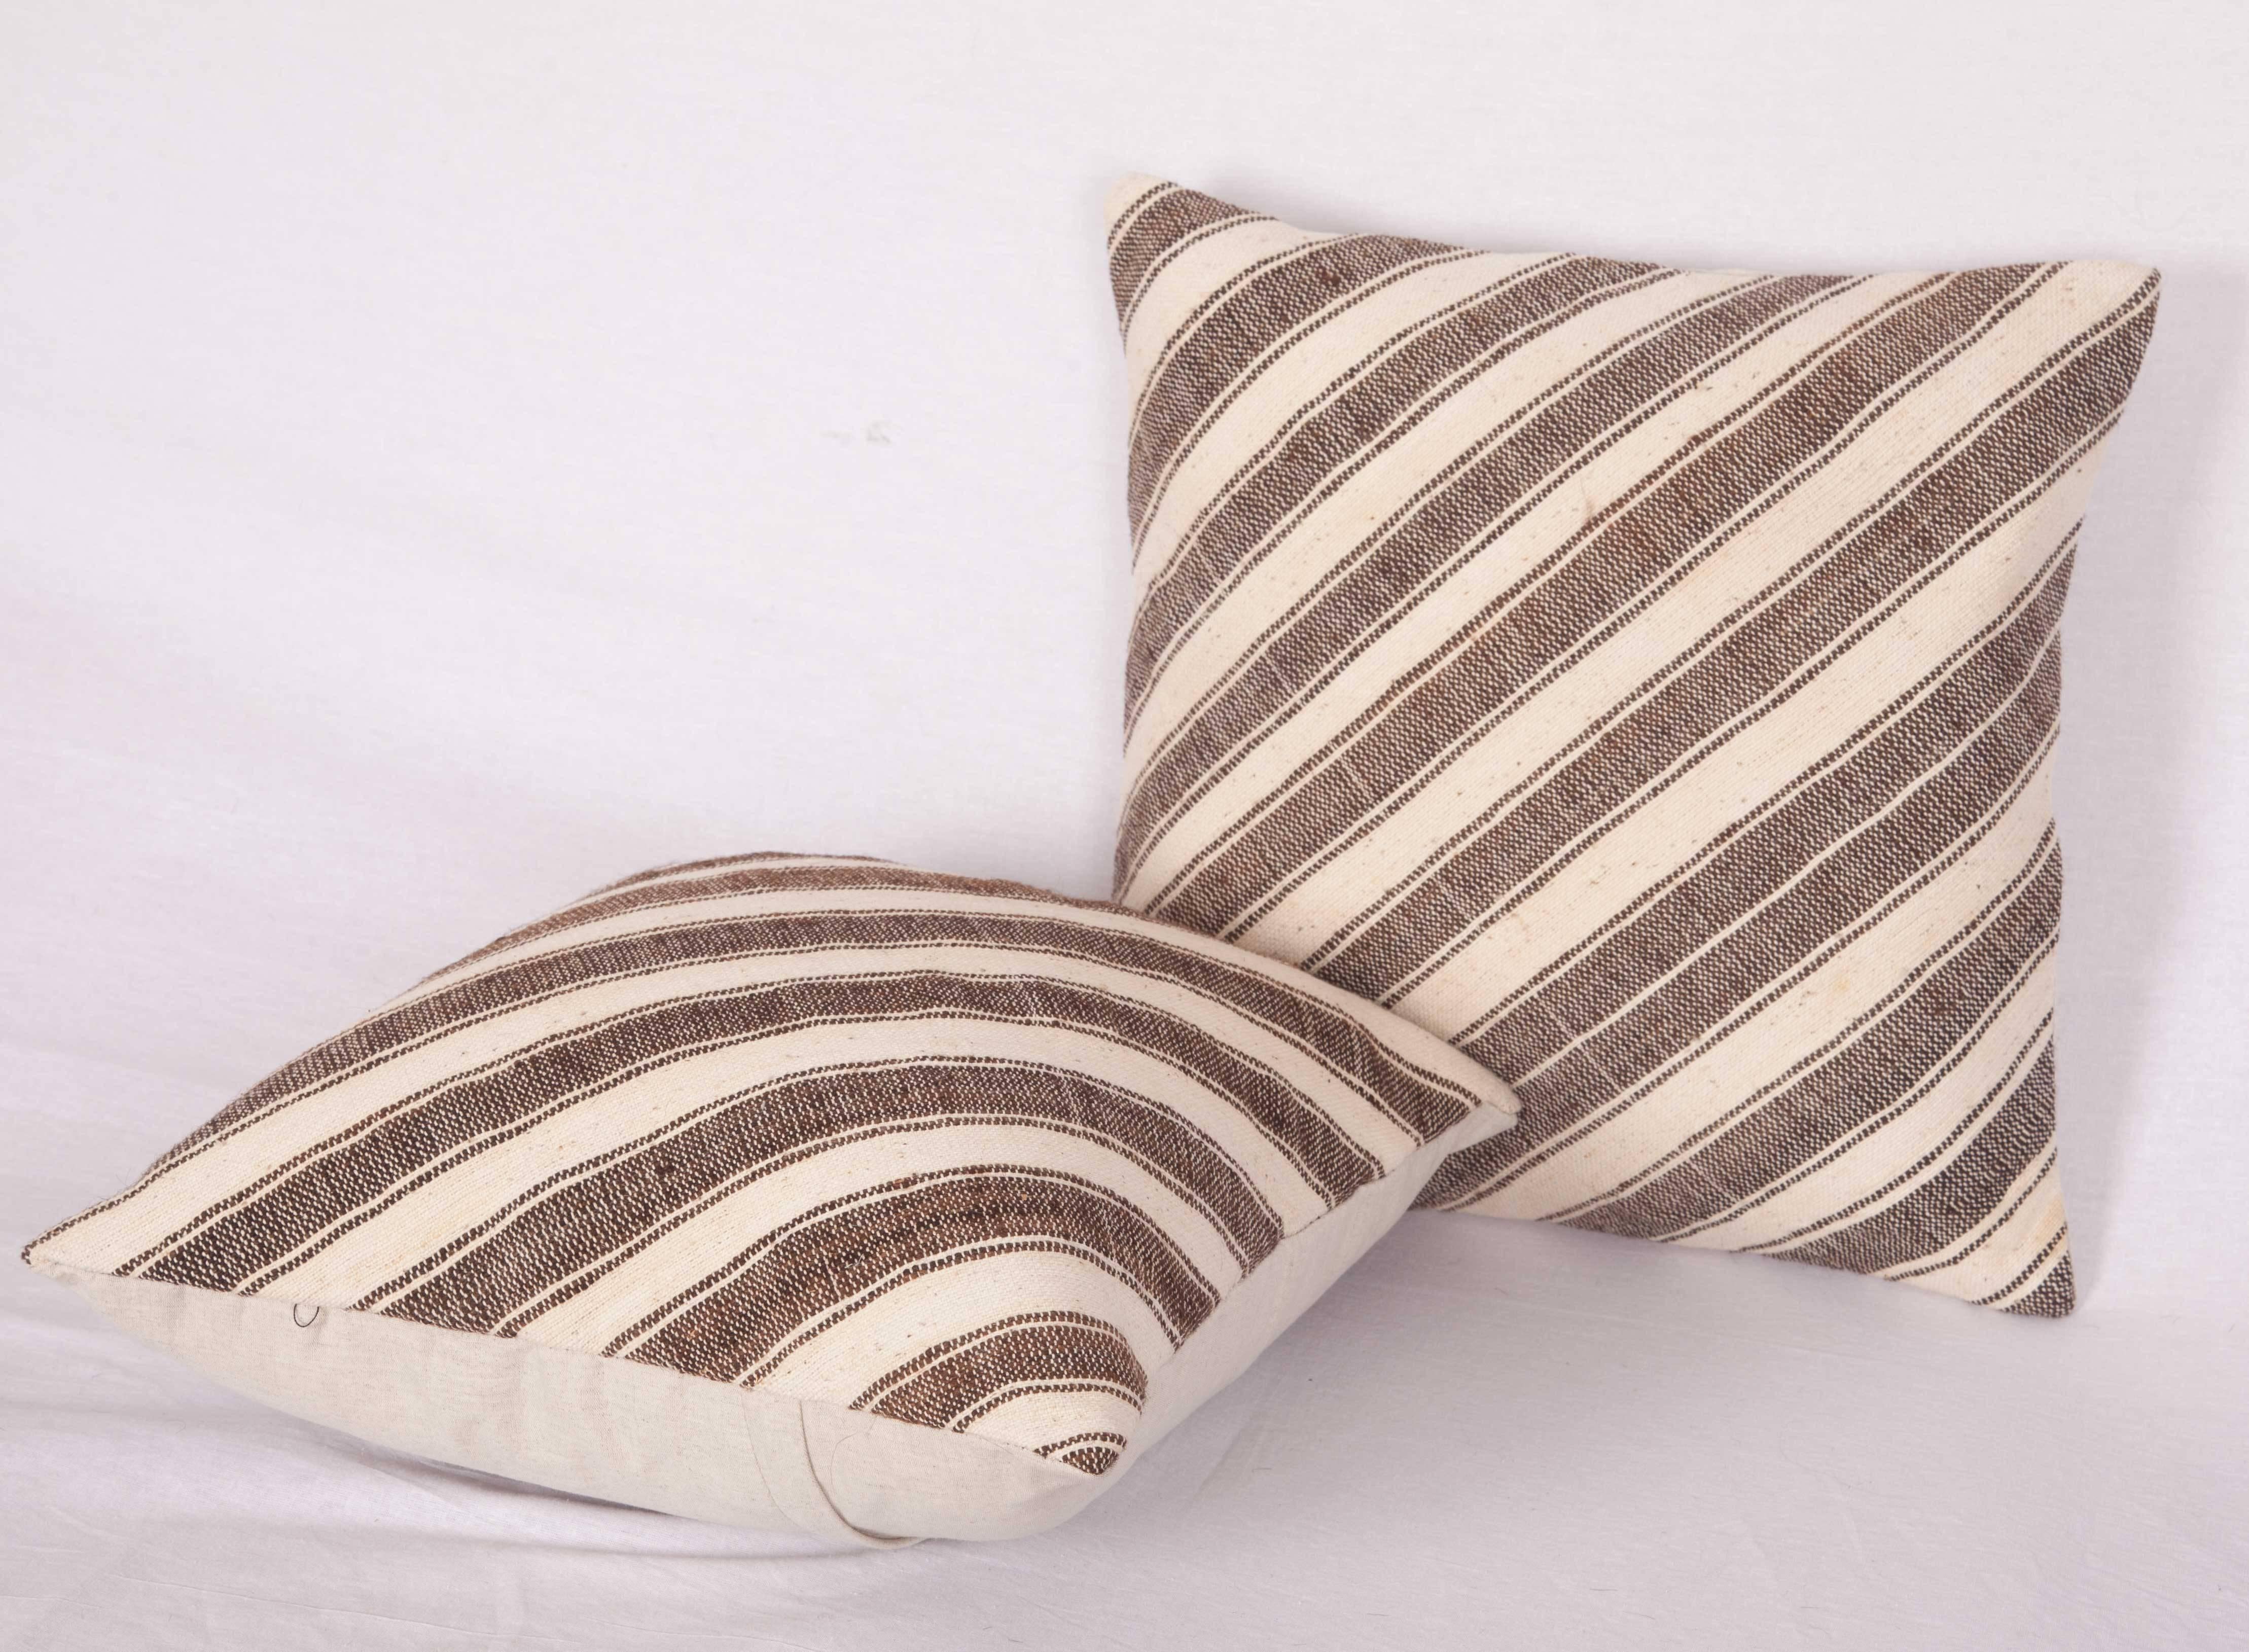 Woven Pillow Cases Fashioned out of an Mid-20th Century Anatolian Kilim